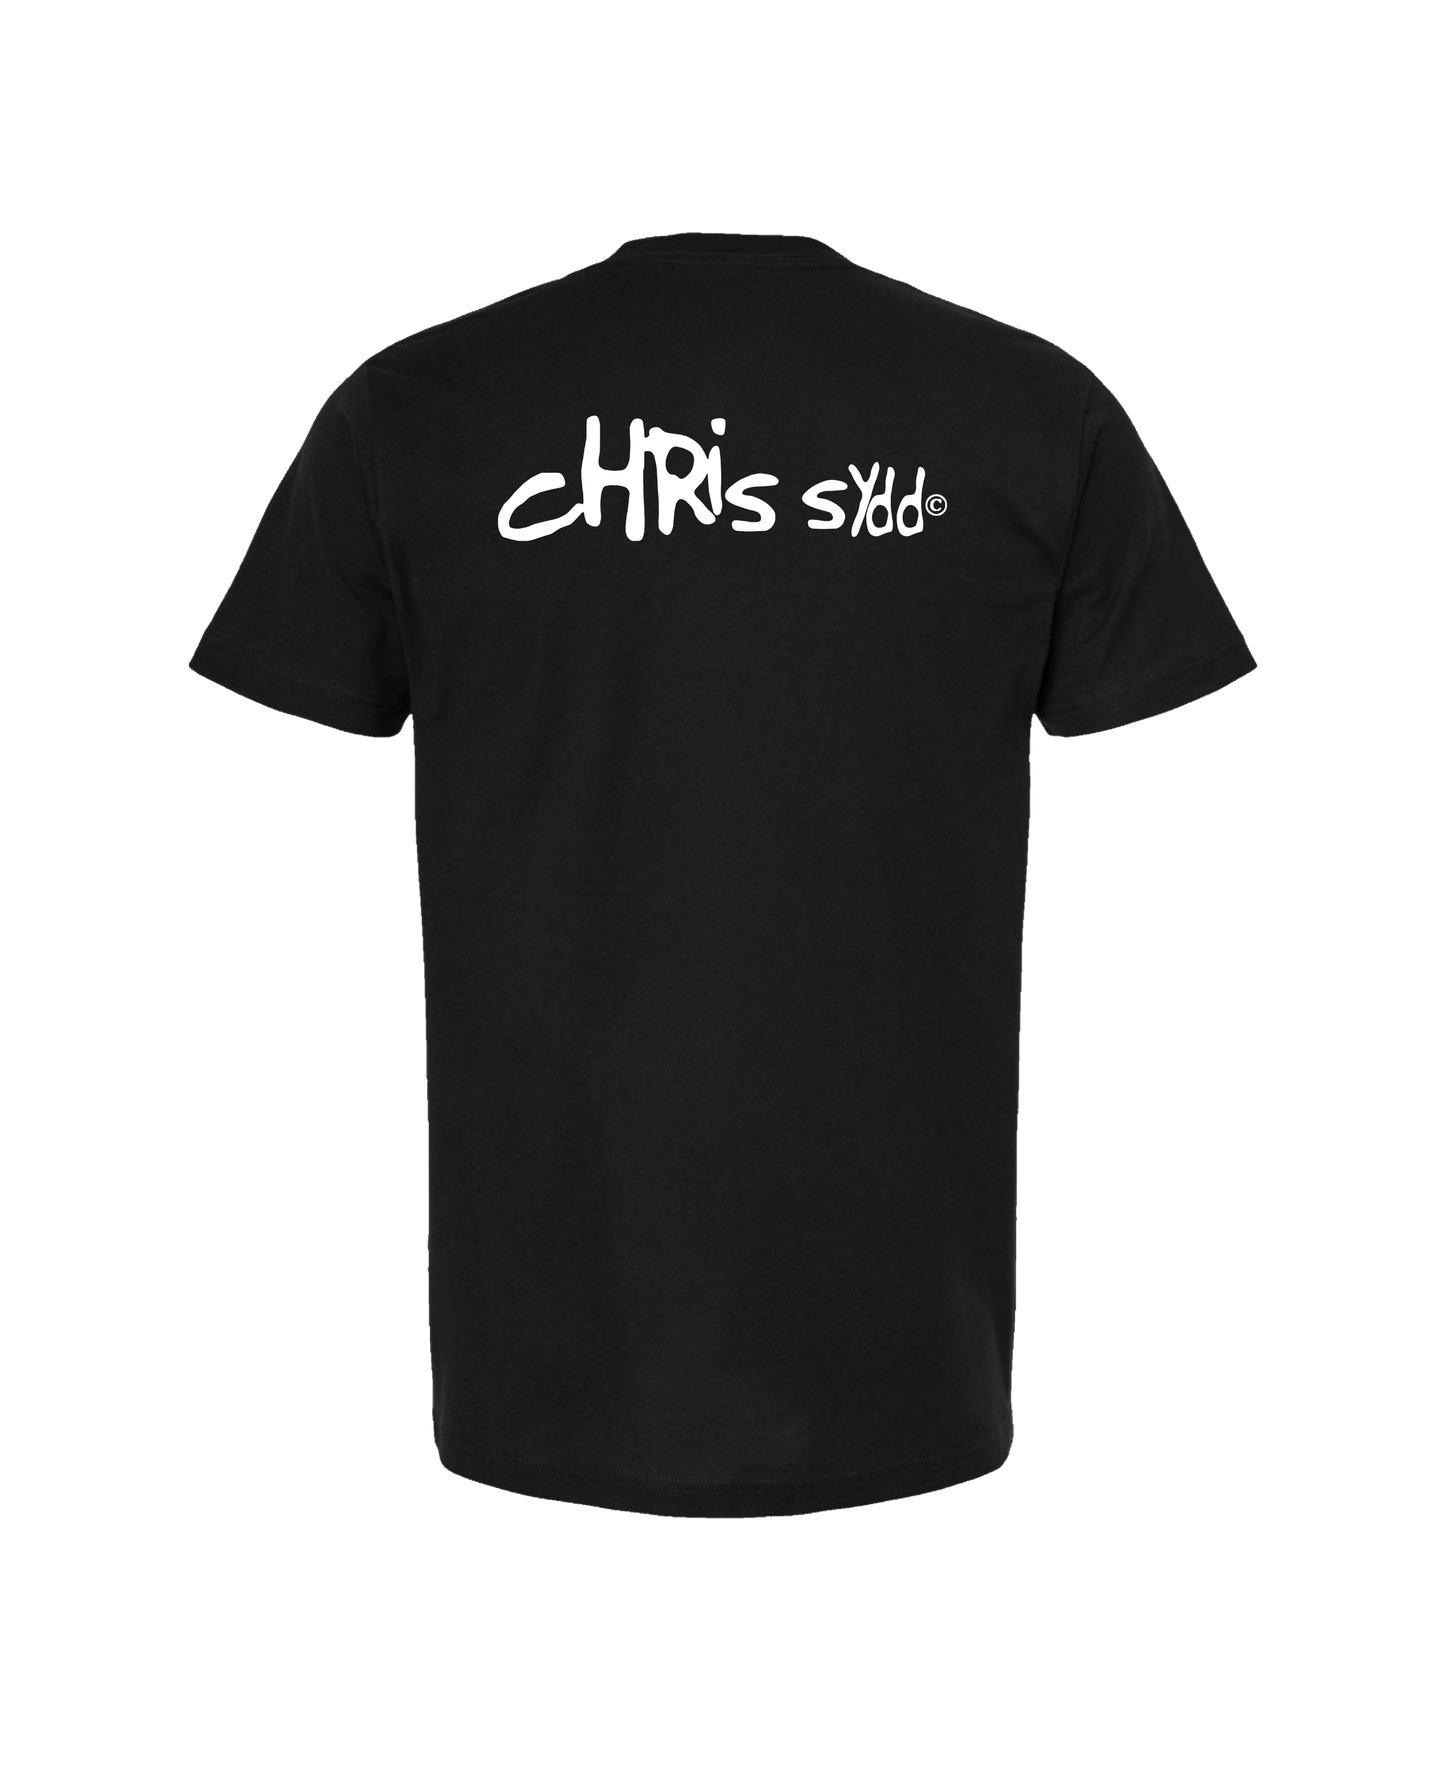 CHRIS SYDD - It Looks Just As Stupid When You Do It. - Black T-Shirt